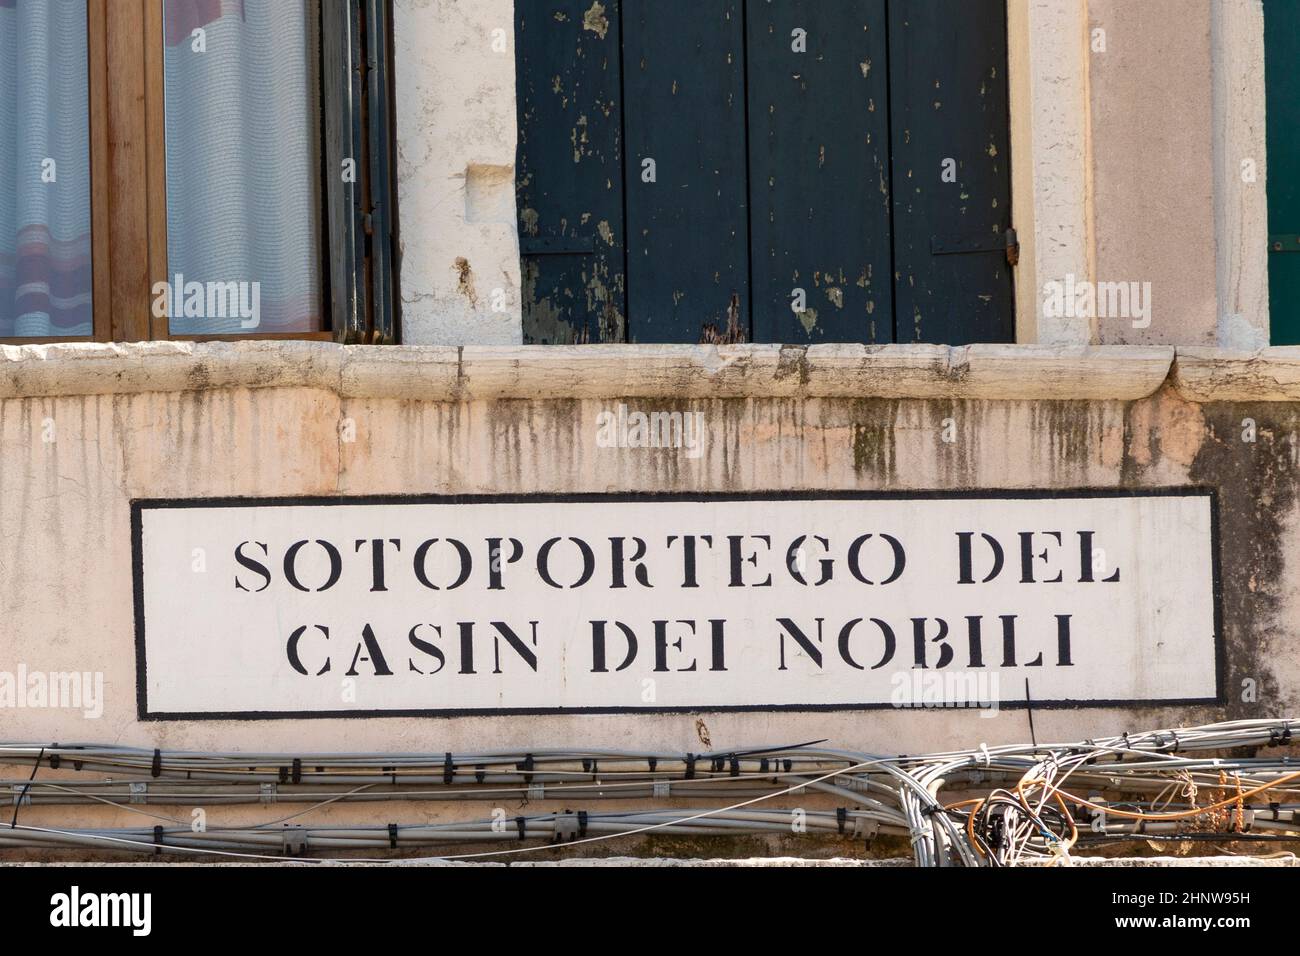 signage  Sotoportego del Casin dei Nobili (english: passage to place of the nobles) in Venice at an old grunge house wall Stock Photo